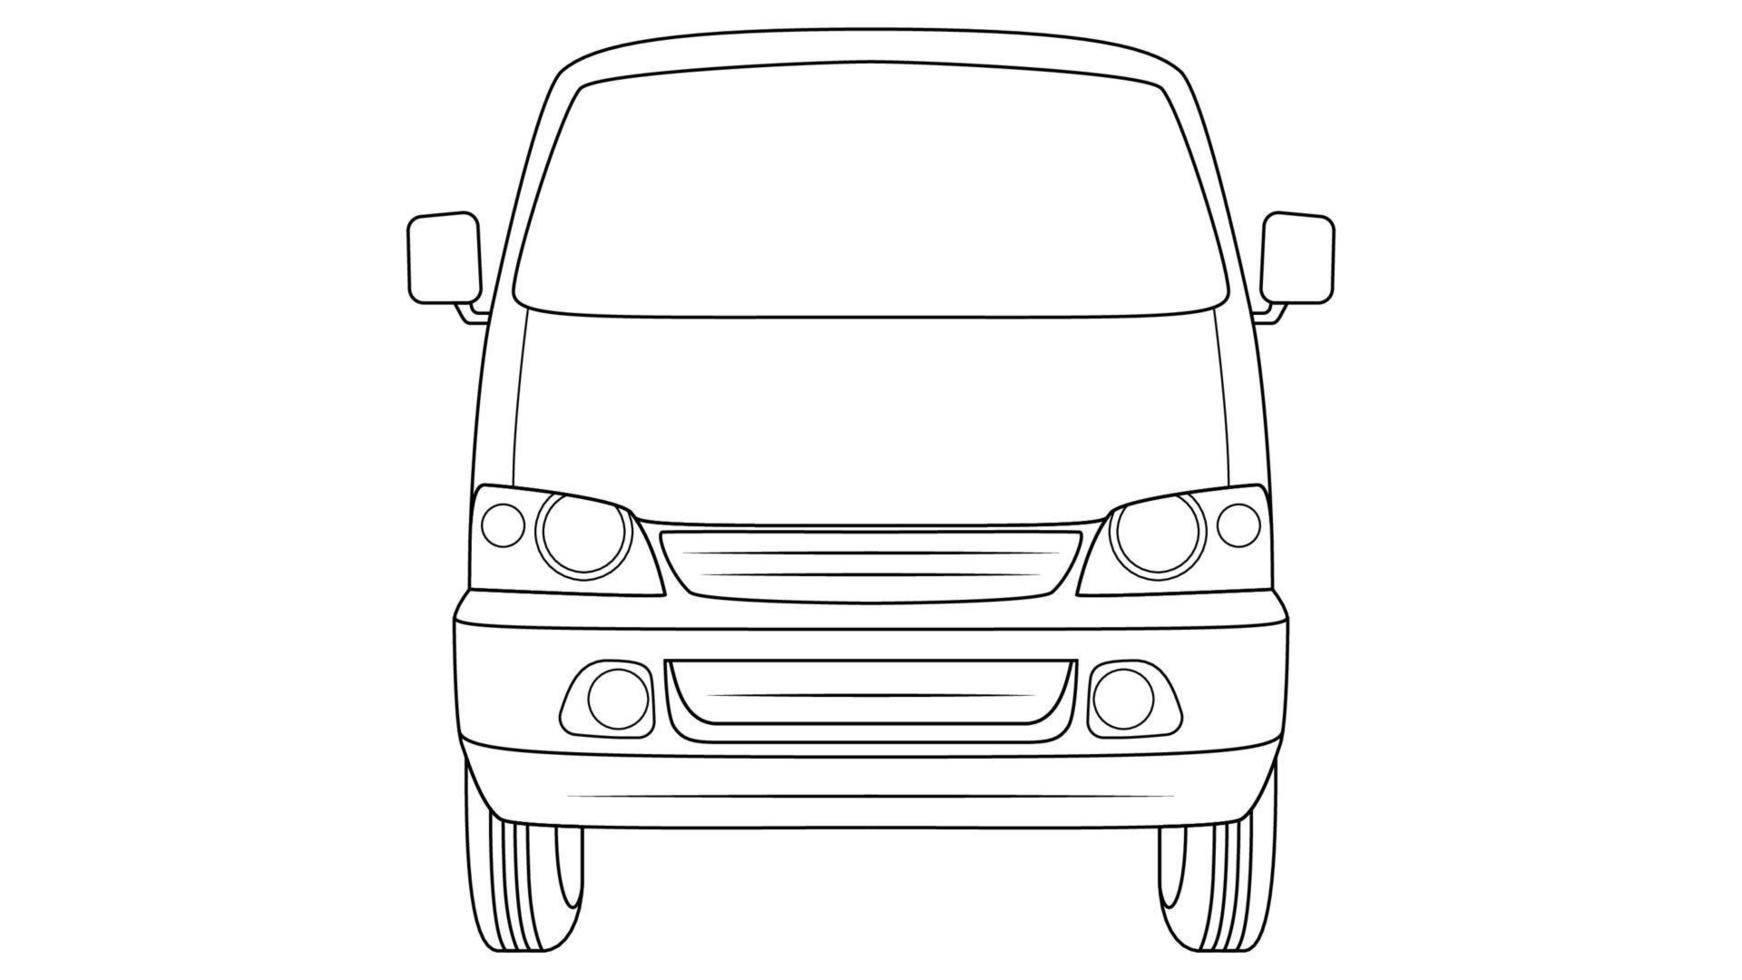 mini can car outline vector illustration on white background